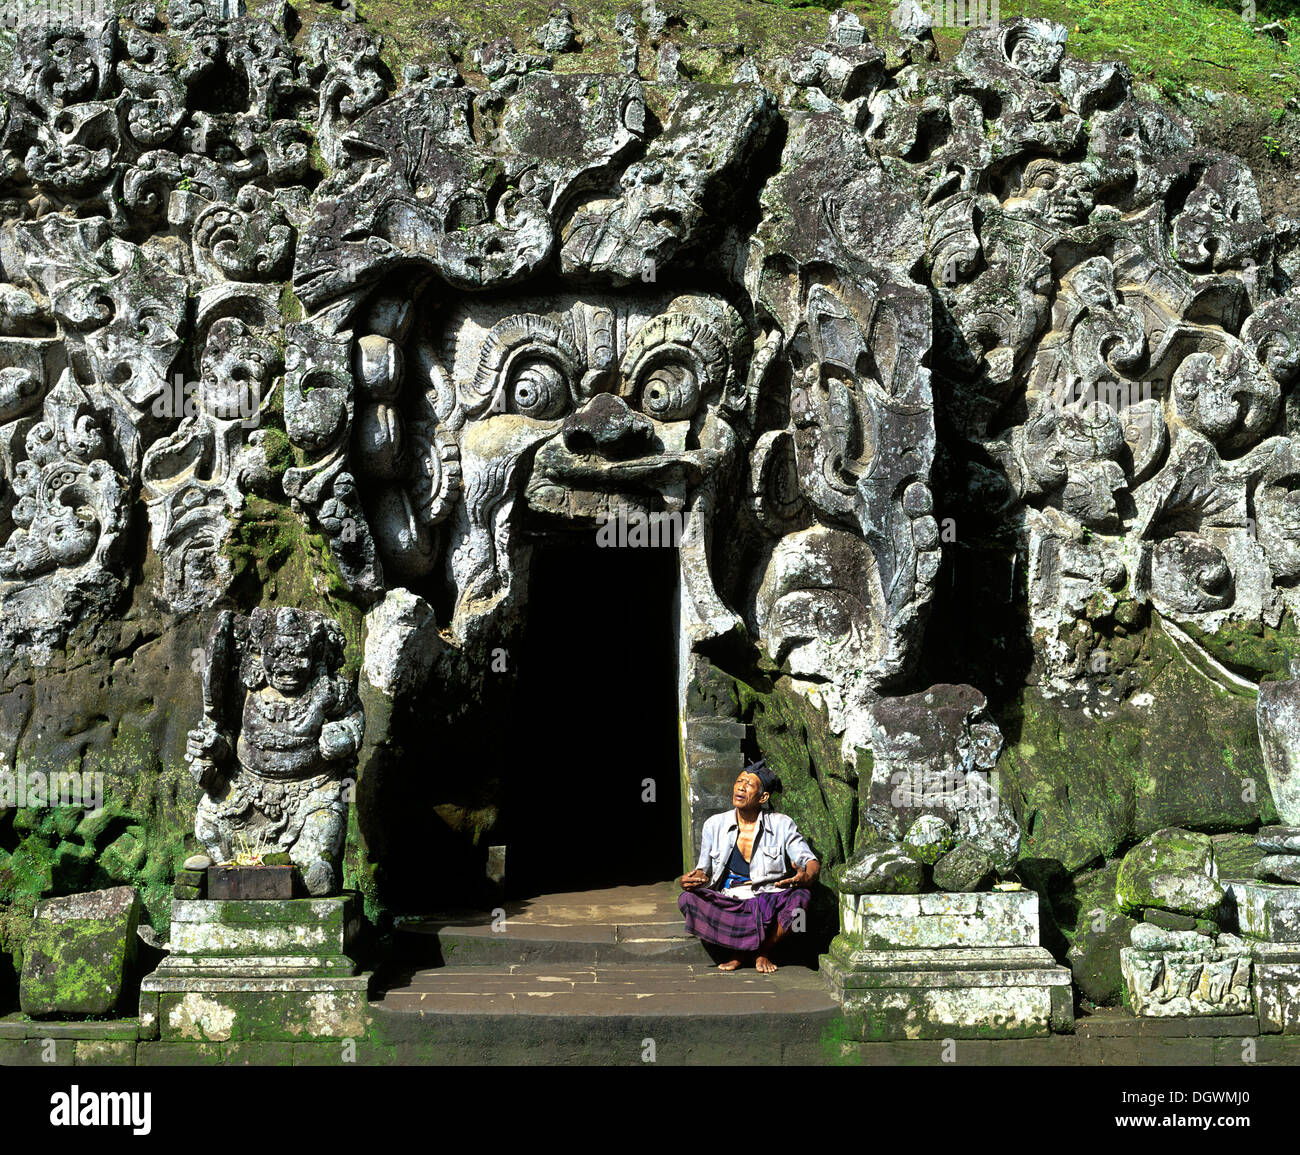 Balinese man sitting at the entrance to the Goa Gajah or Elephant Cave, cave temple, Bedulu, Bali, Südostasien, Indonesia Stock Photo